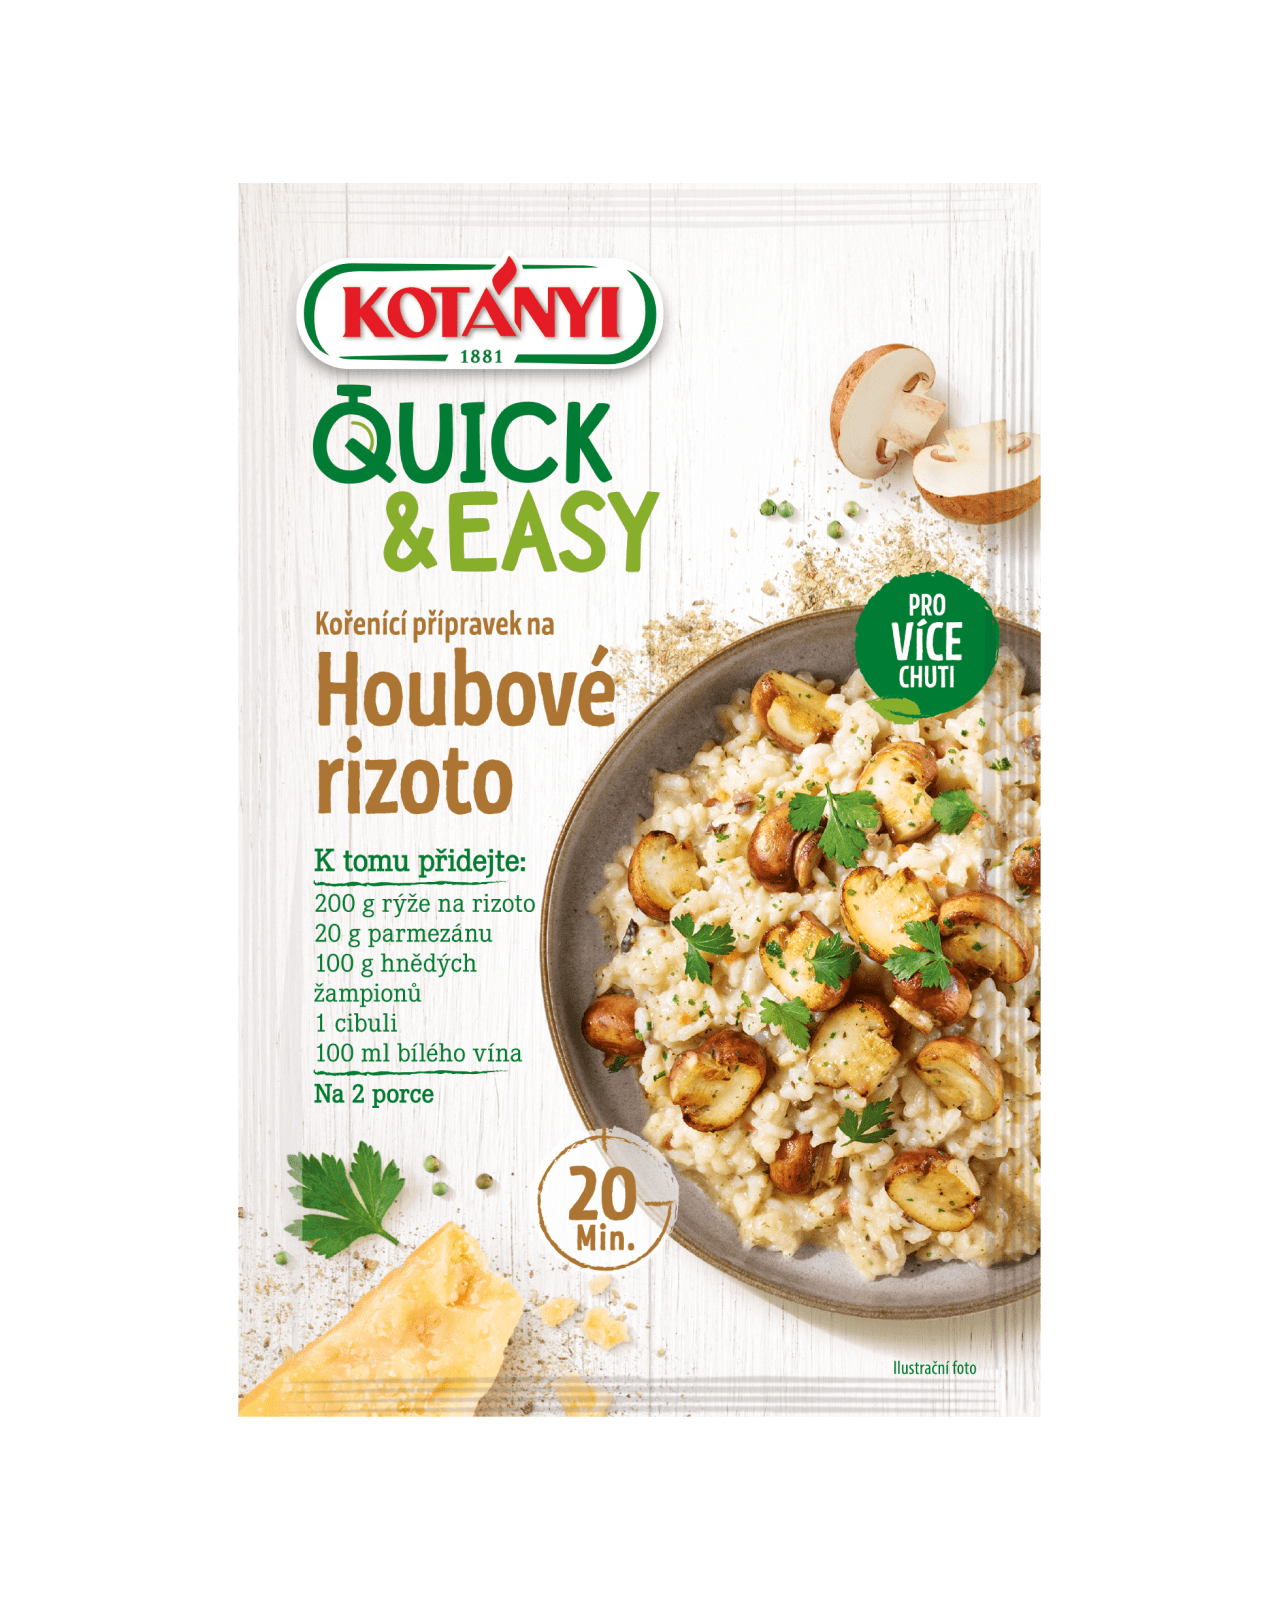 3700035 Quick And Easy Pilz Risotto Cz 8590132037002 Min